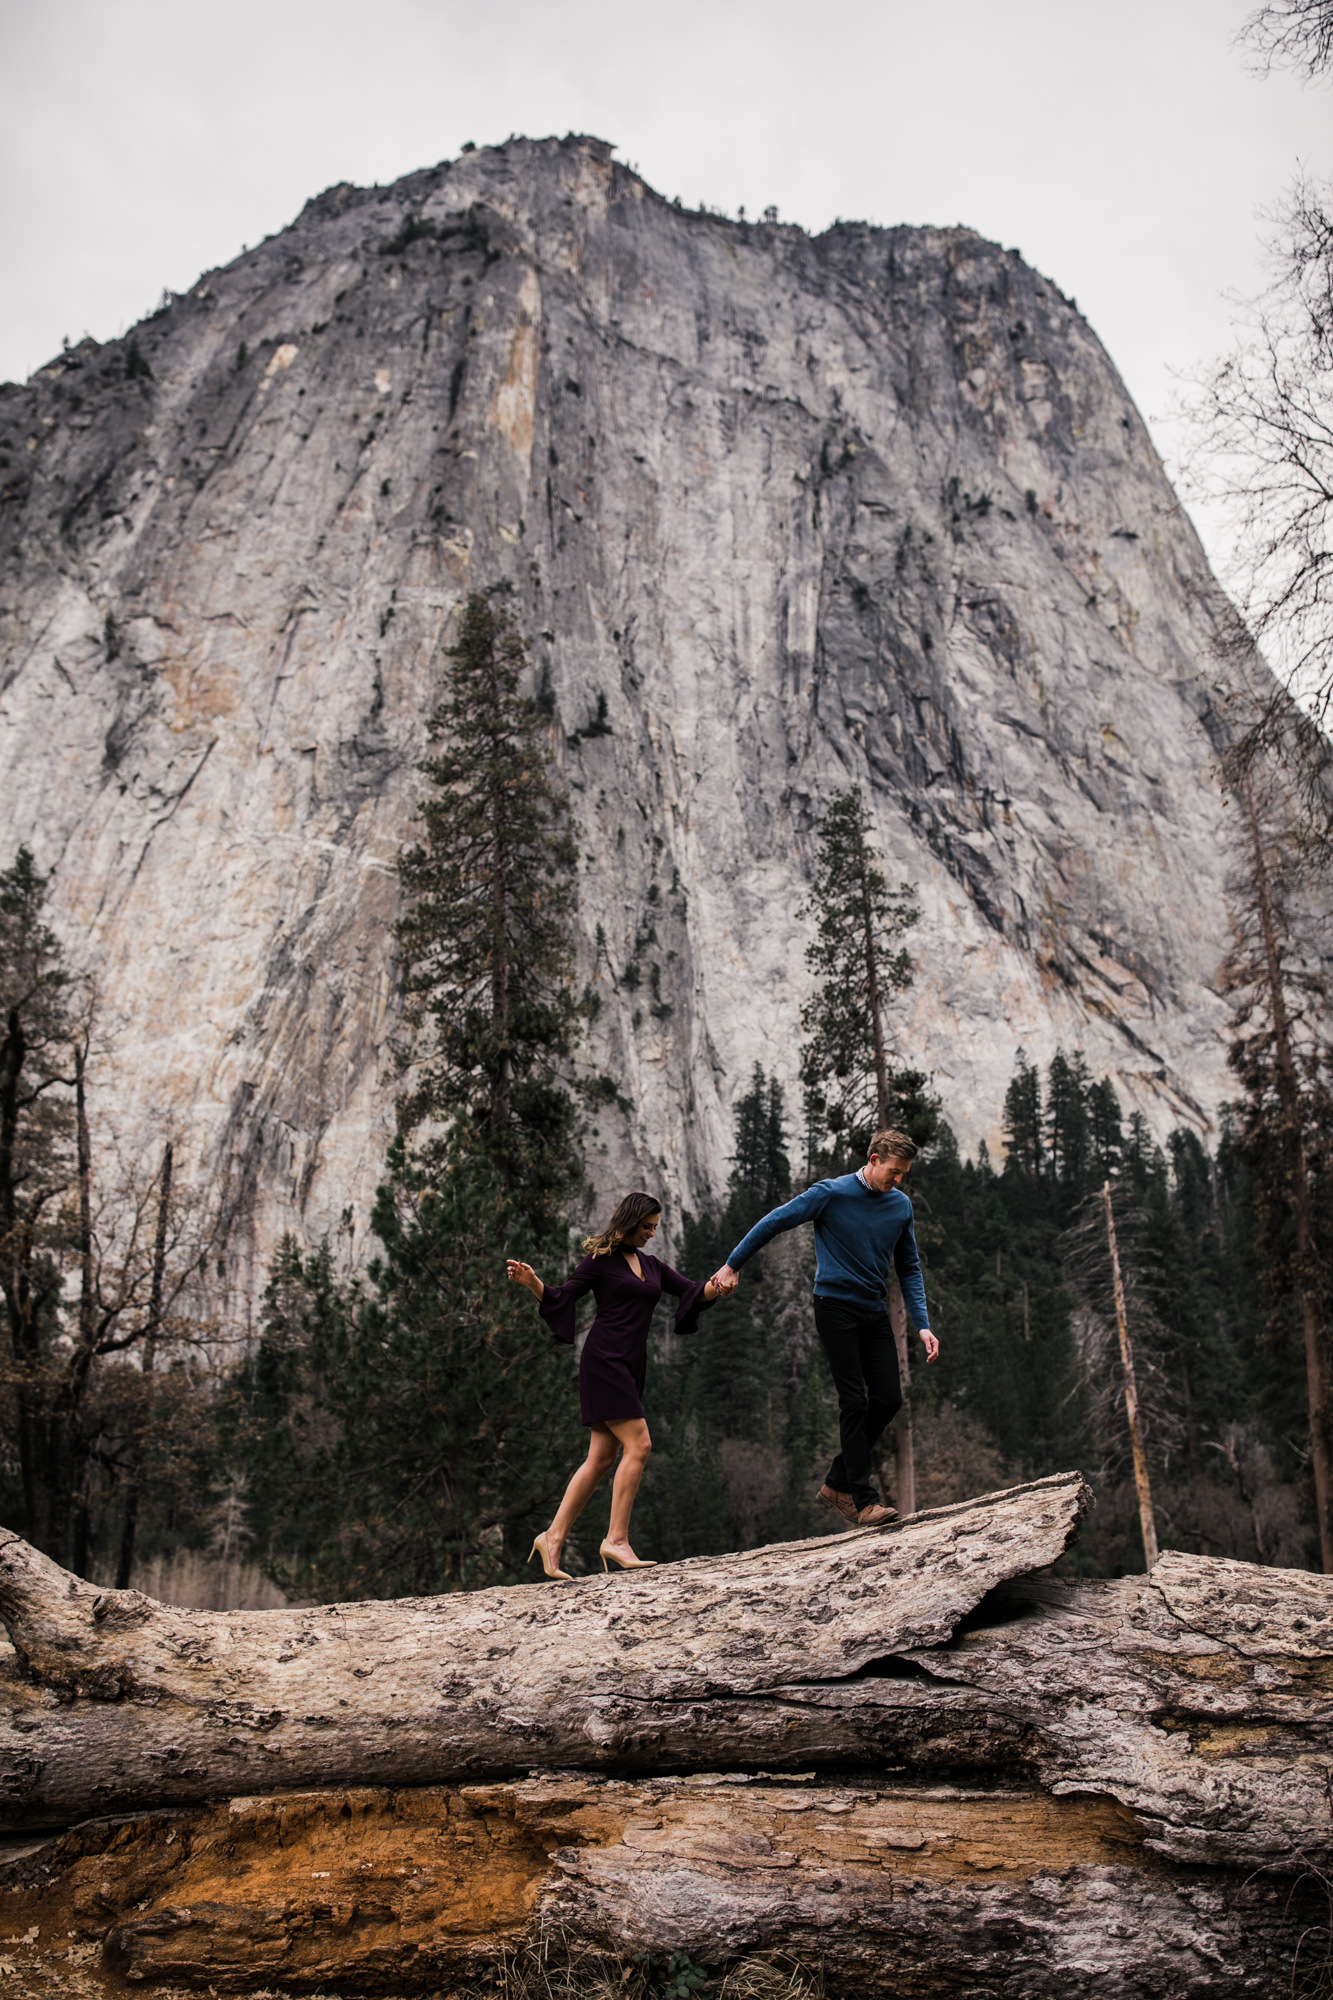 mountain top engagement session in yosemite national park | adventurous destination wedding photographer | the hearnes adventure photography | www.thehearnes.com